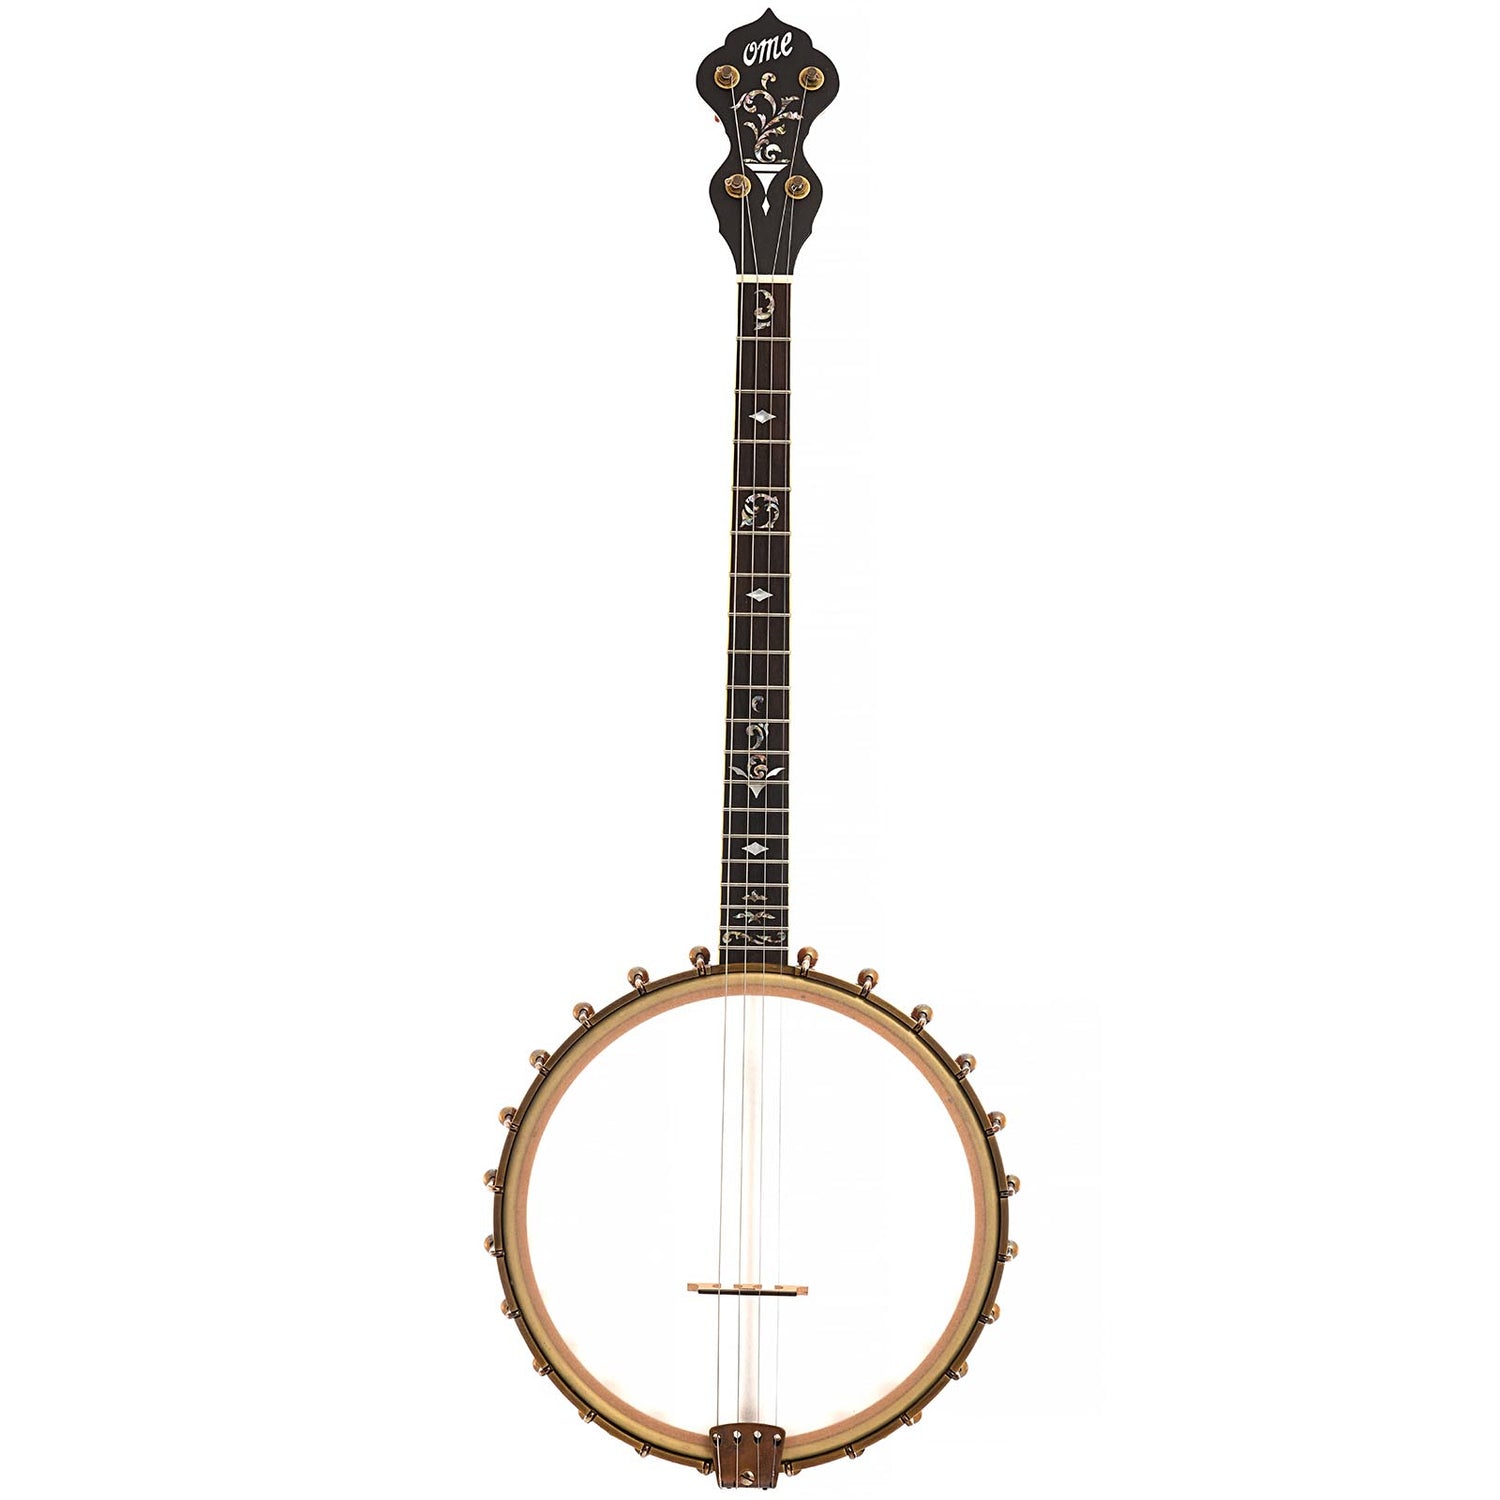 Full front of Ome Sweetgrass 11" Tenor Banjo & Gigbag - Curly Maple